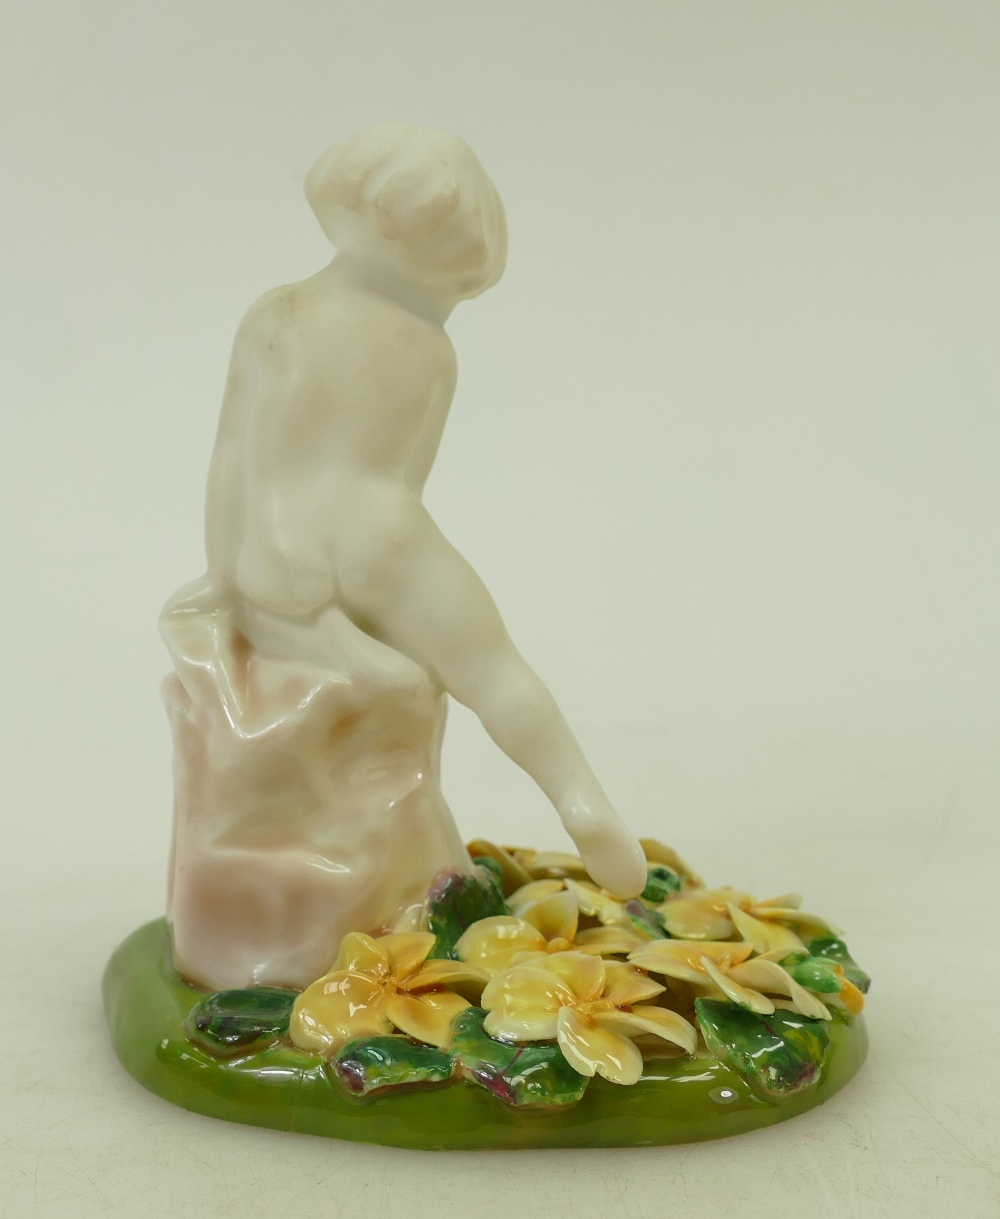 Royal Doulton figure A Saucy Nymph HN1539: In white colourway mounted on a floral base, dated 1938. - Image 3 of 3